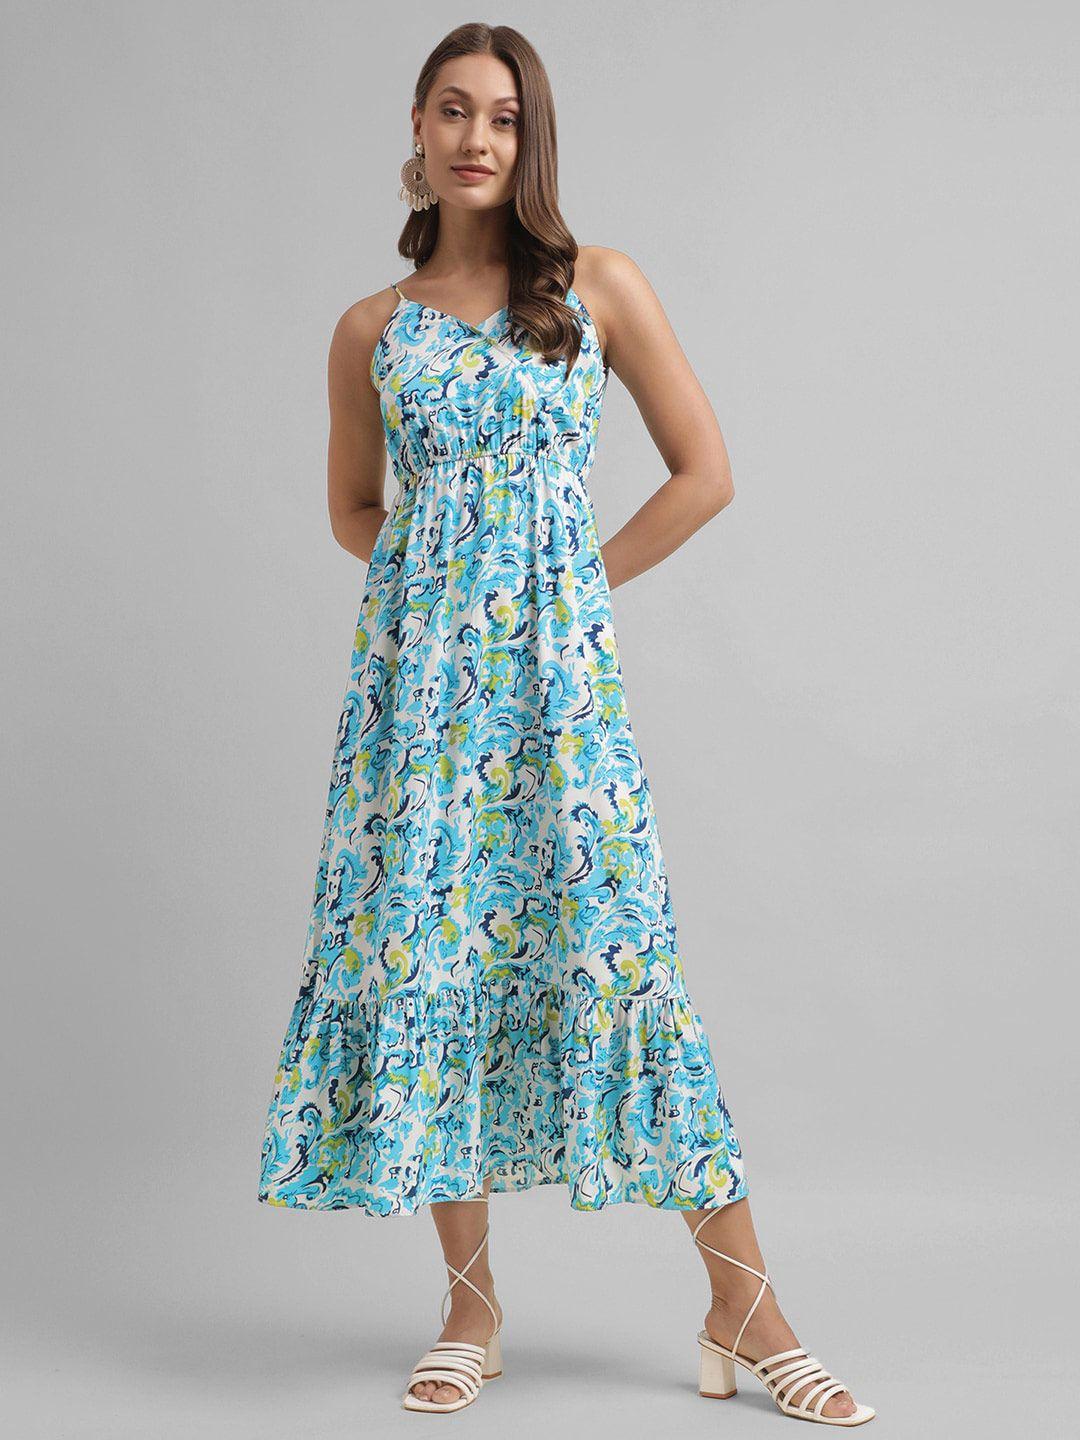 selvia floral printed shoulder straps gathered & pleated sleeveless midi fit & flare dress